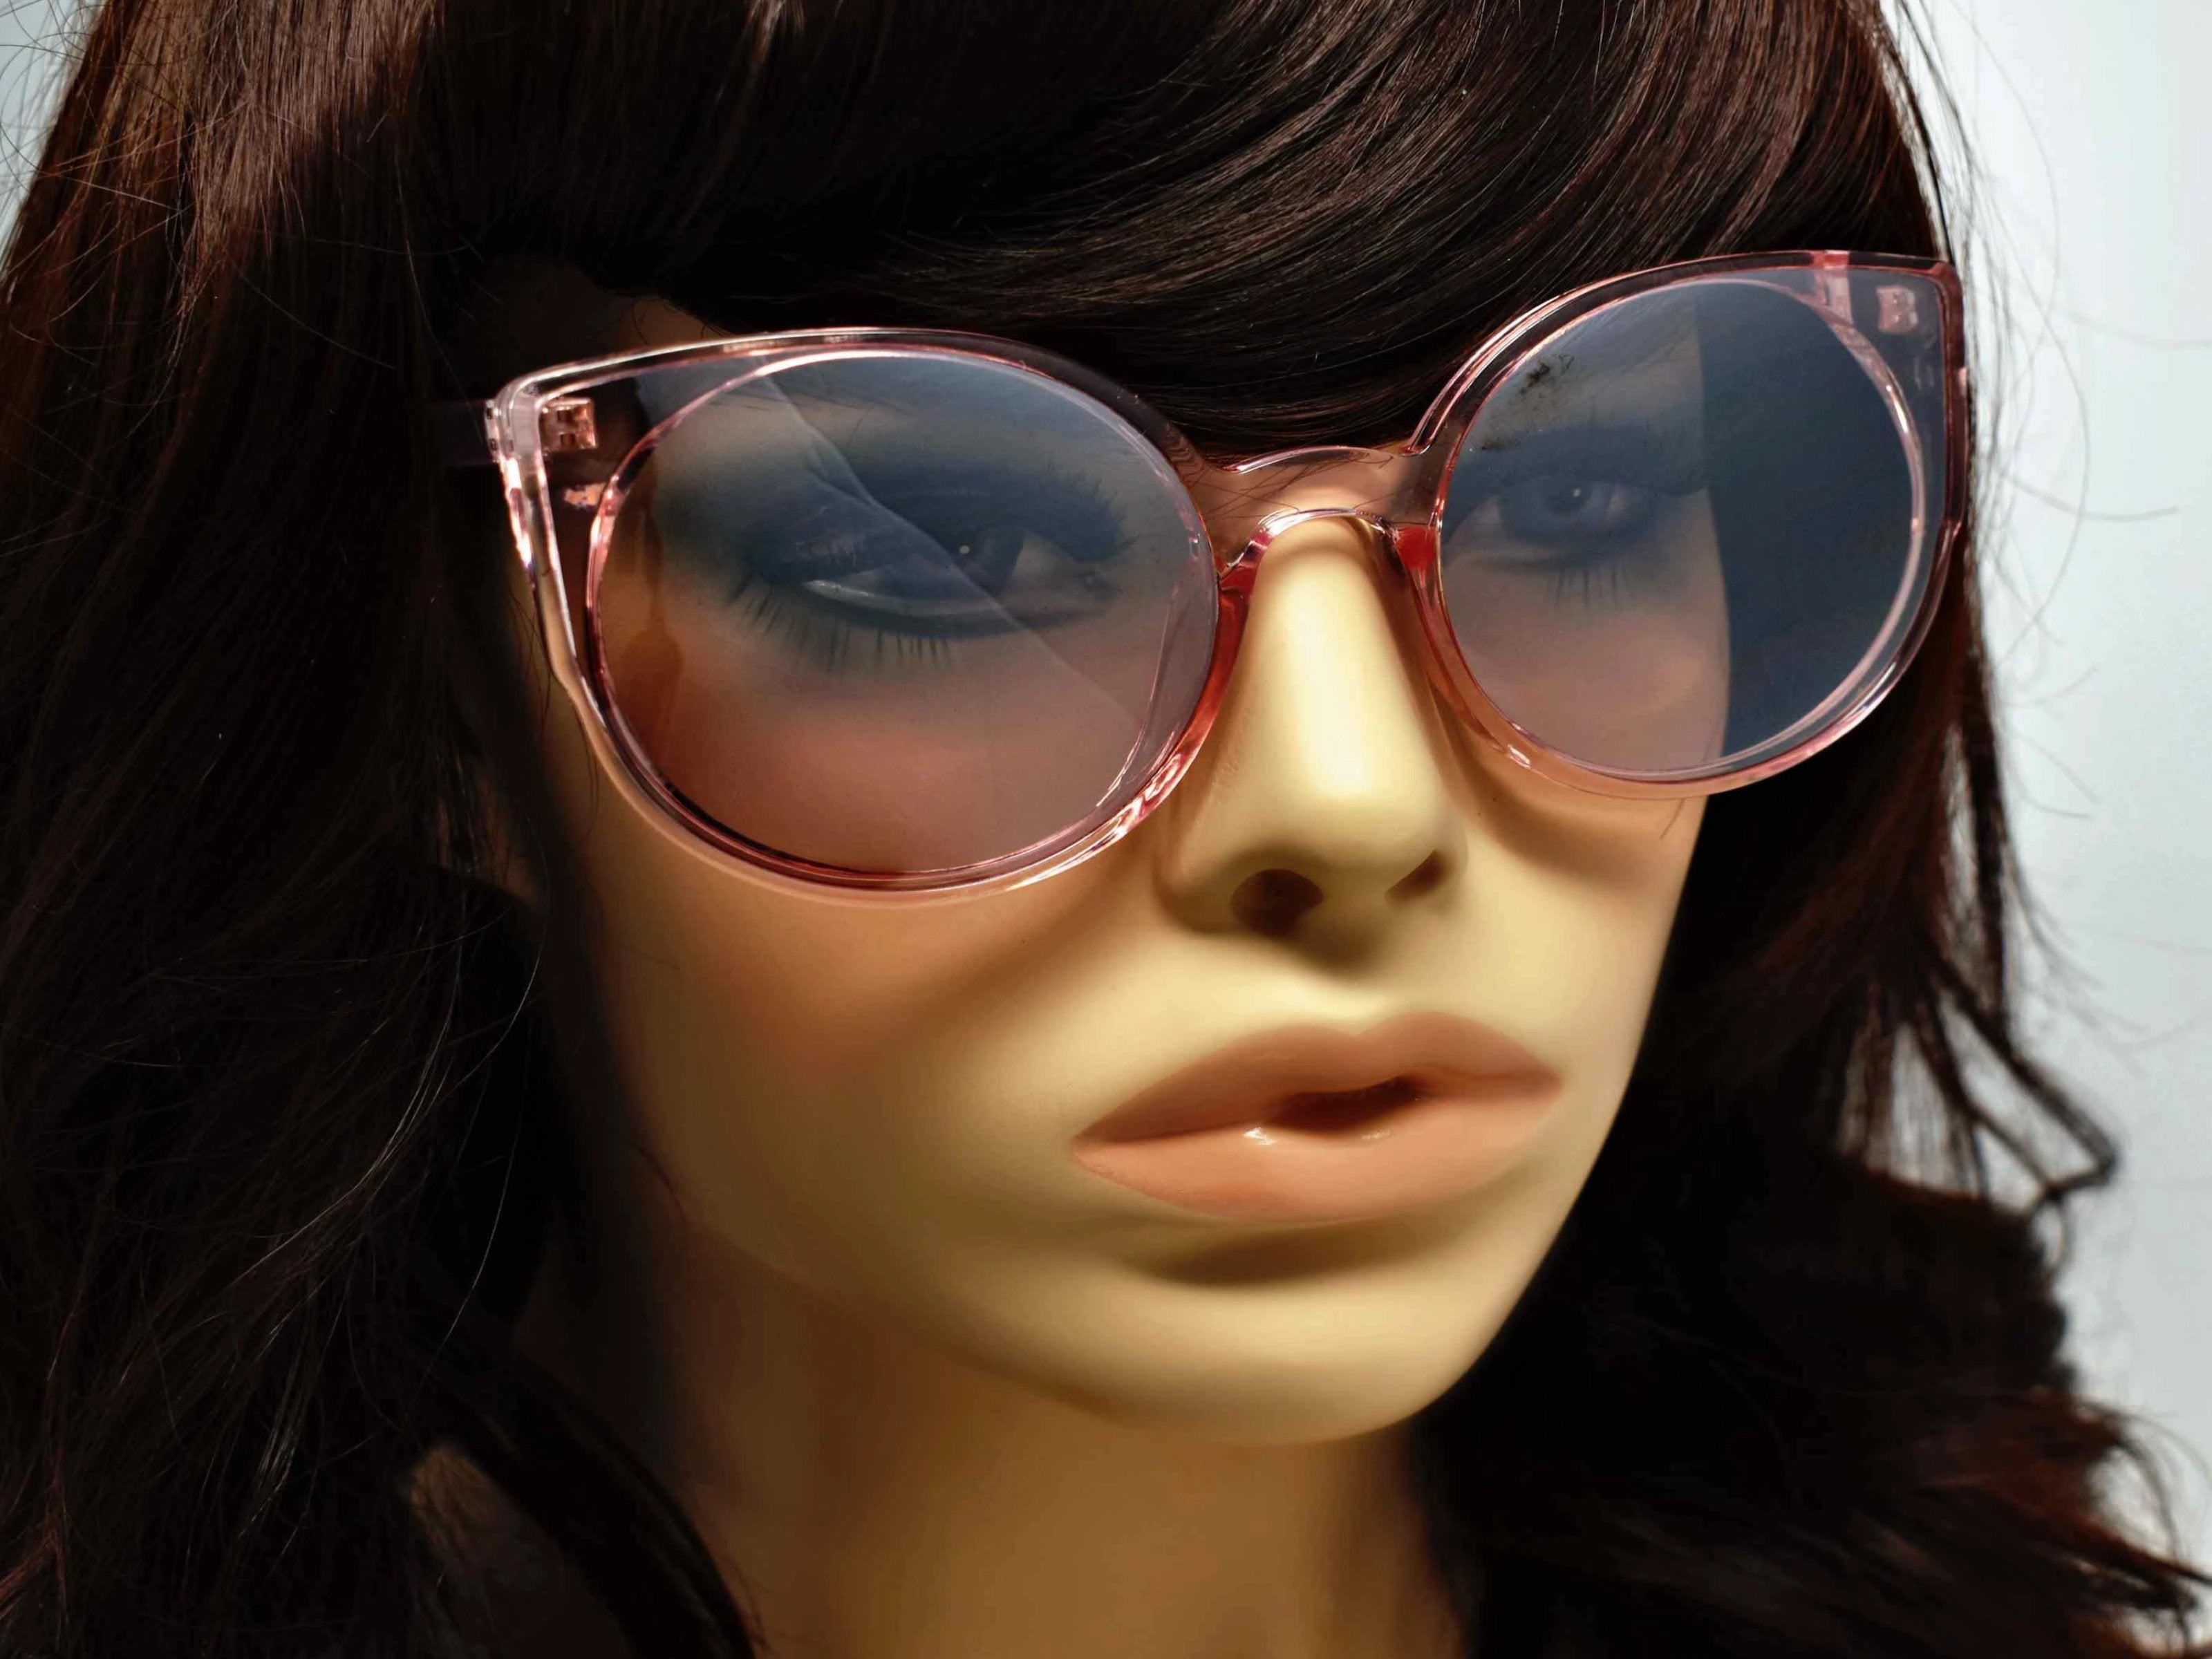 Say hello to our stylish Tansy pink framed sunglasses with pink lens and a cat eye shape.